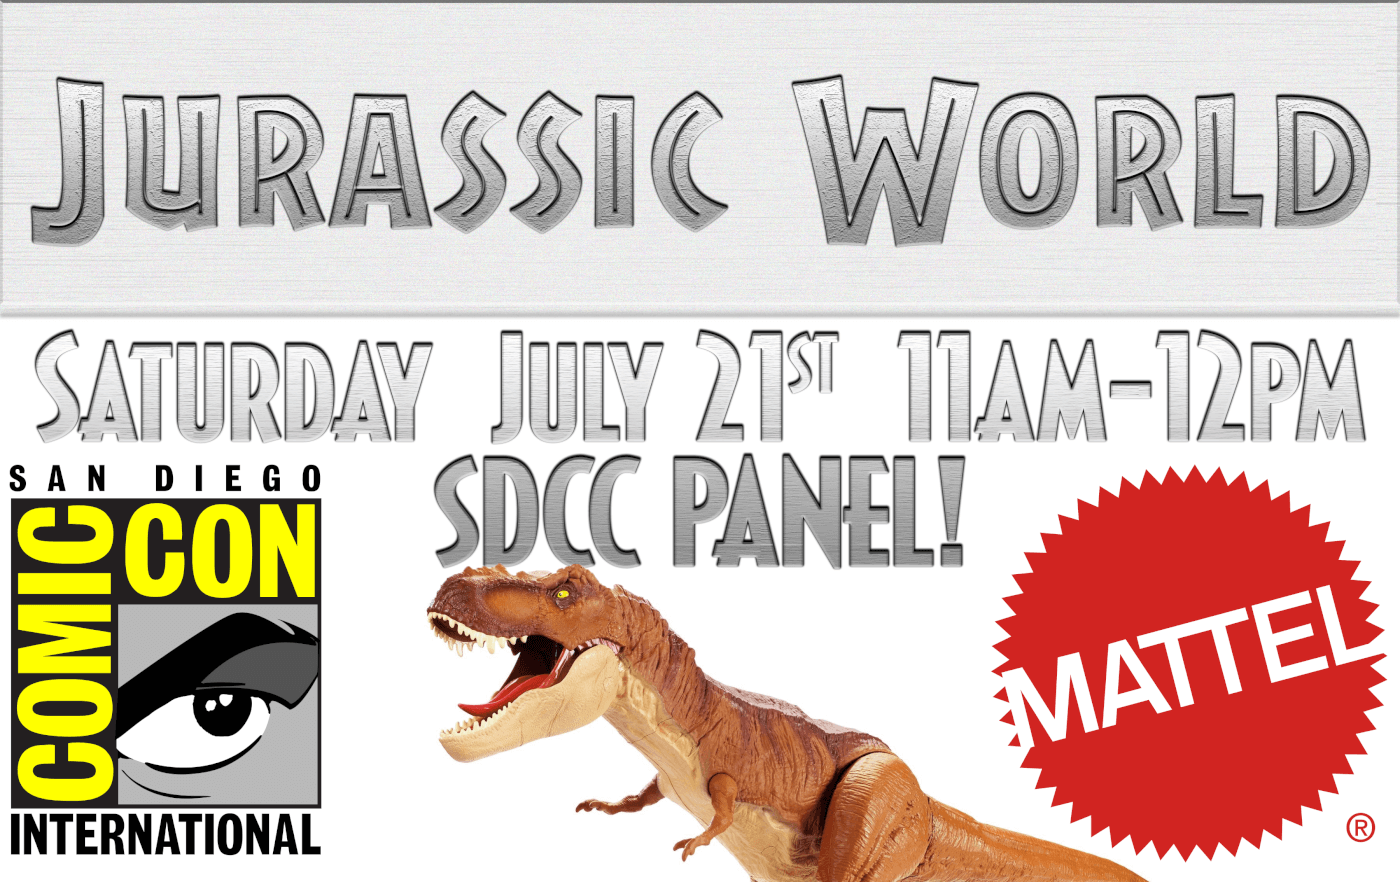 Mattel to Host Jurassic World San Diego Comic Con Panel This Saturday Featuring Reveals & Giveaways!